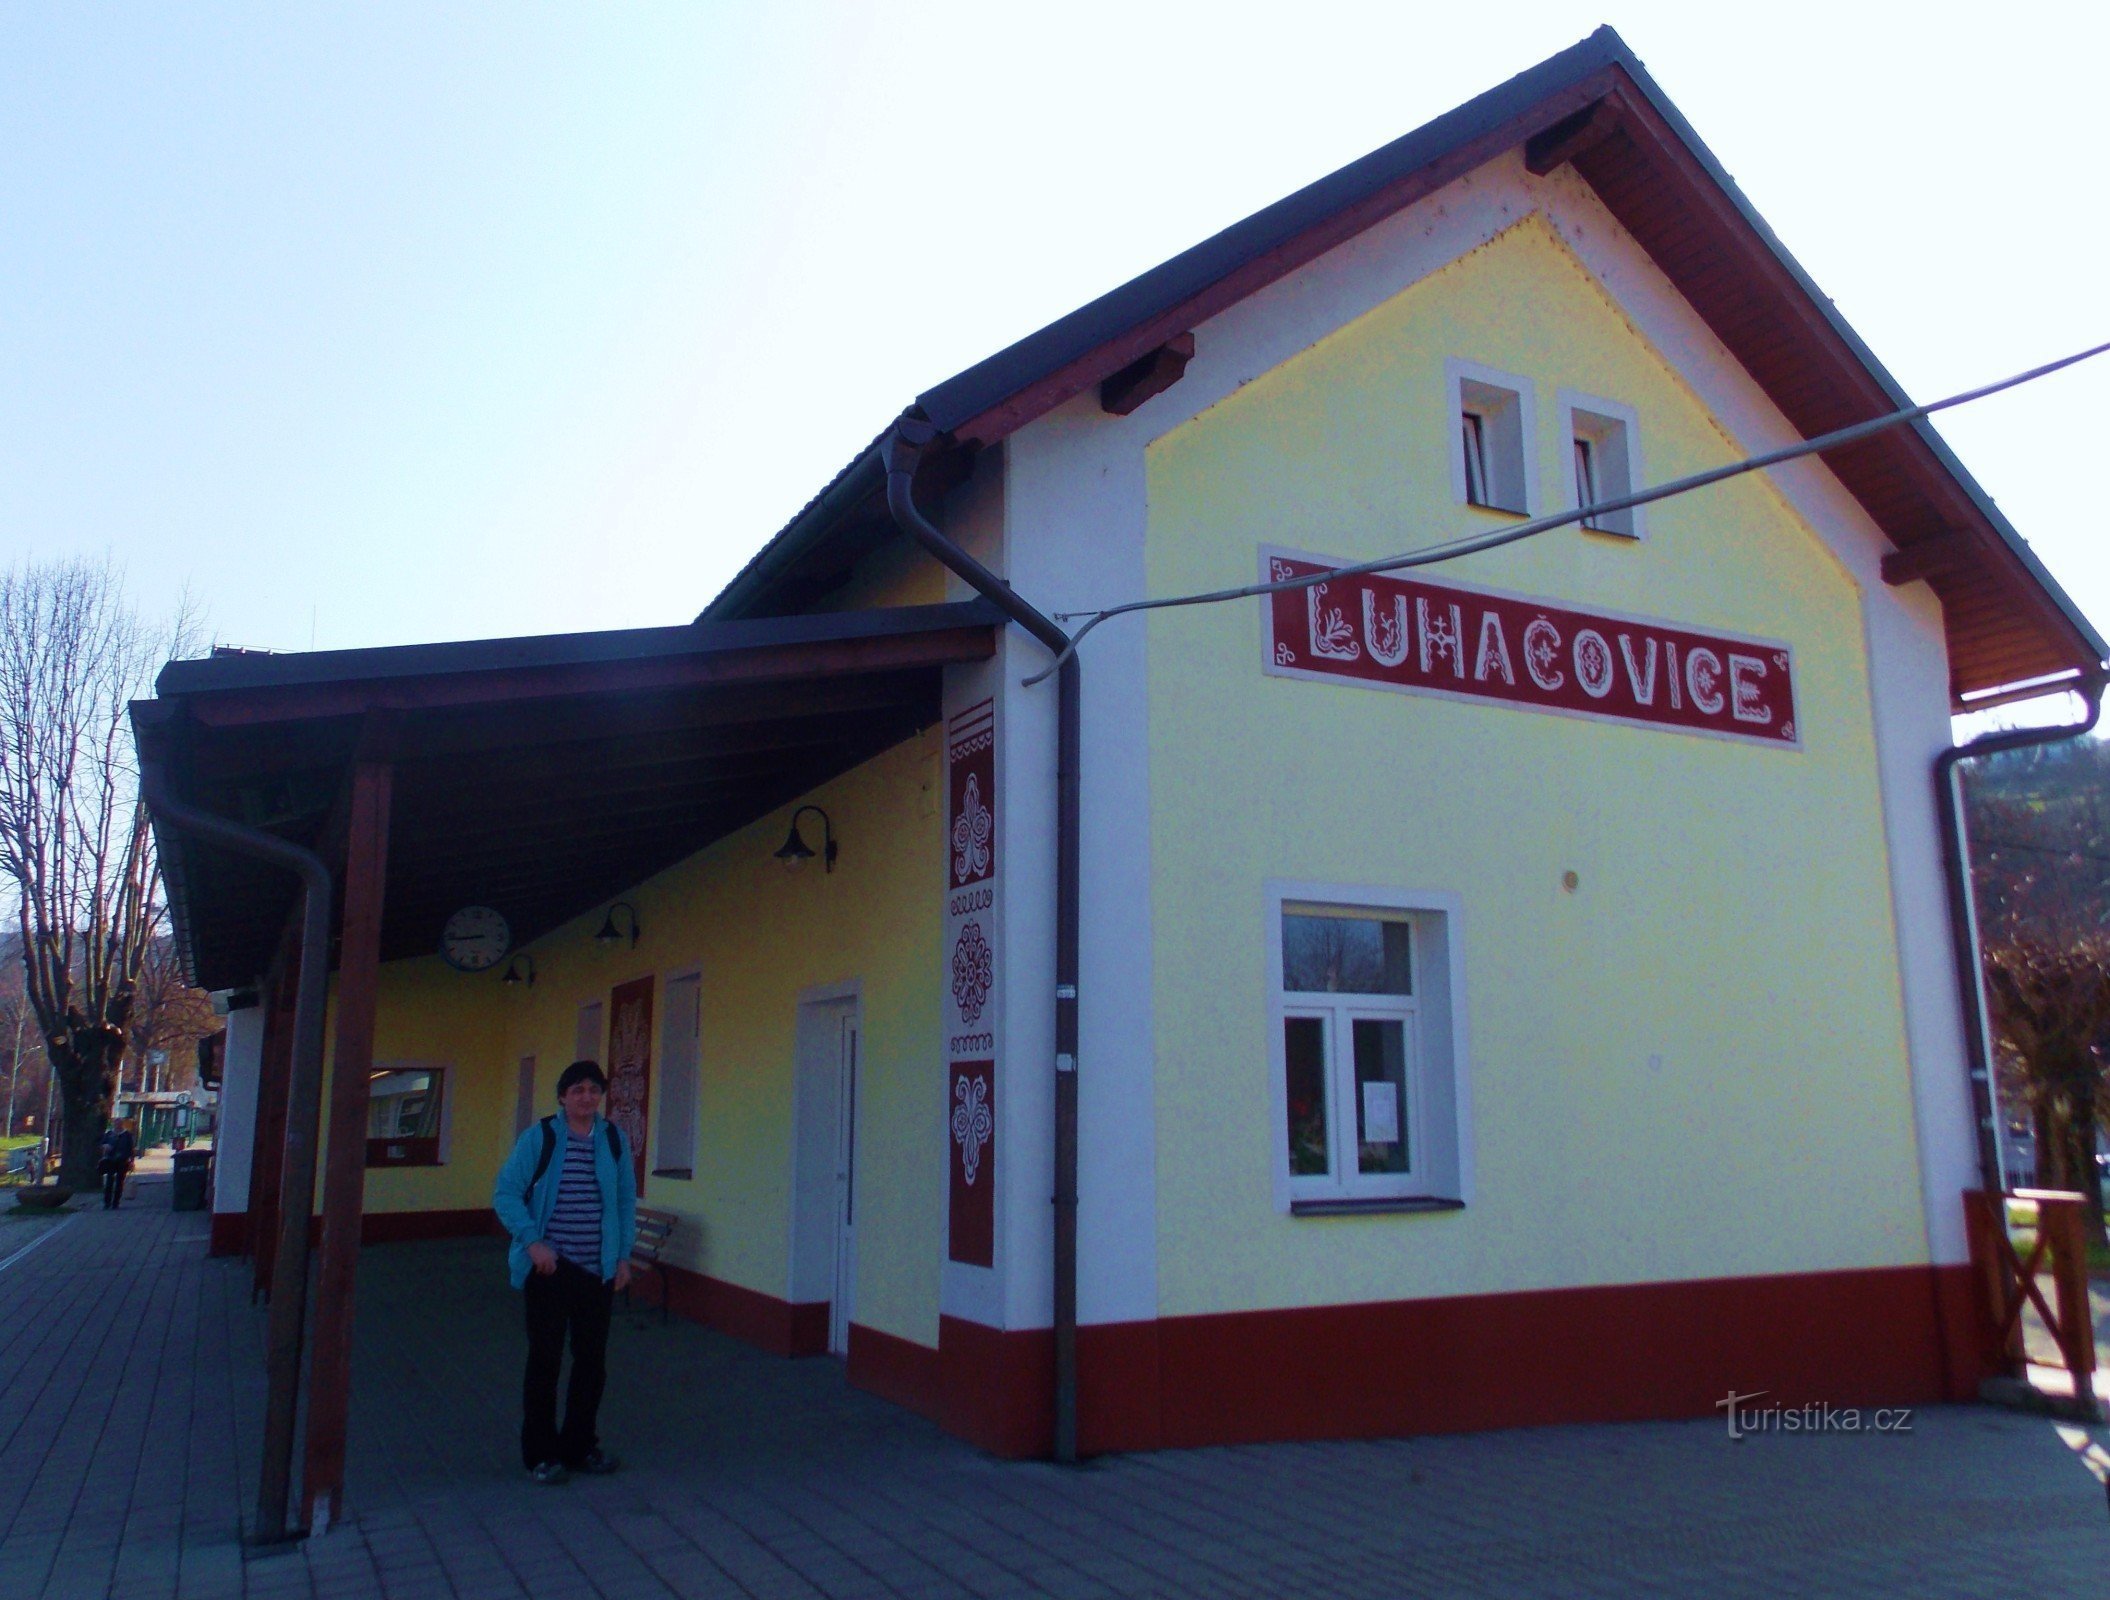 The train station in Luhačovice